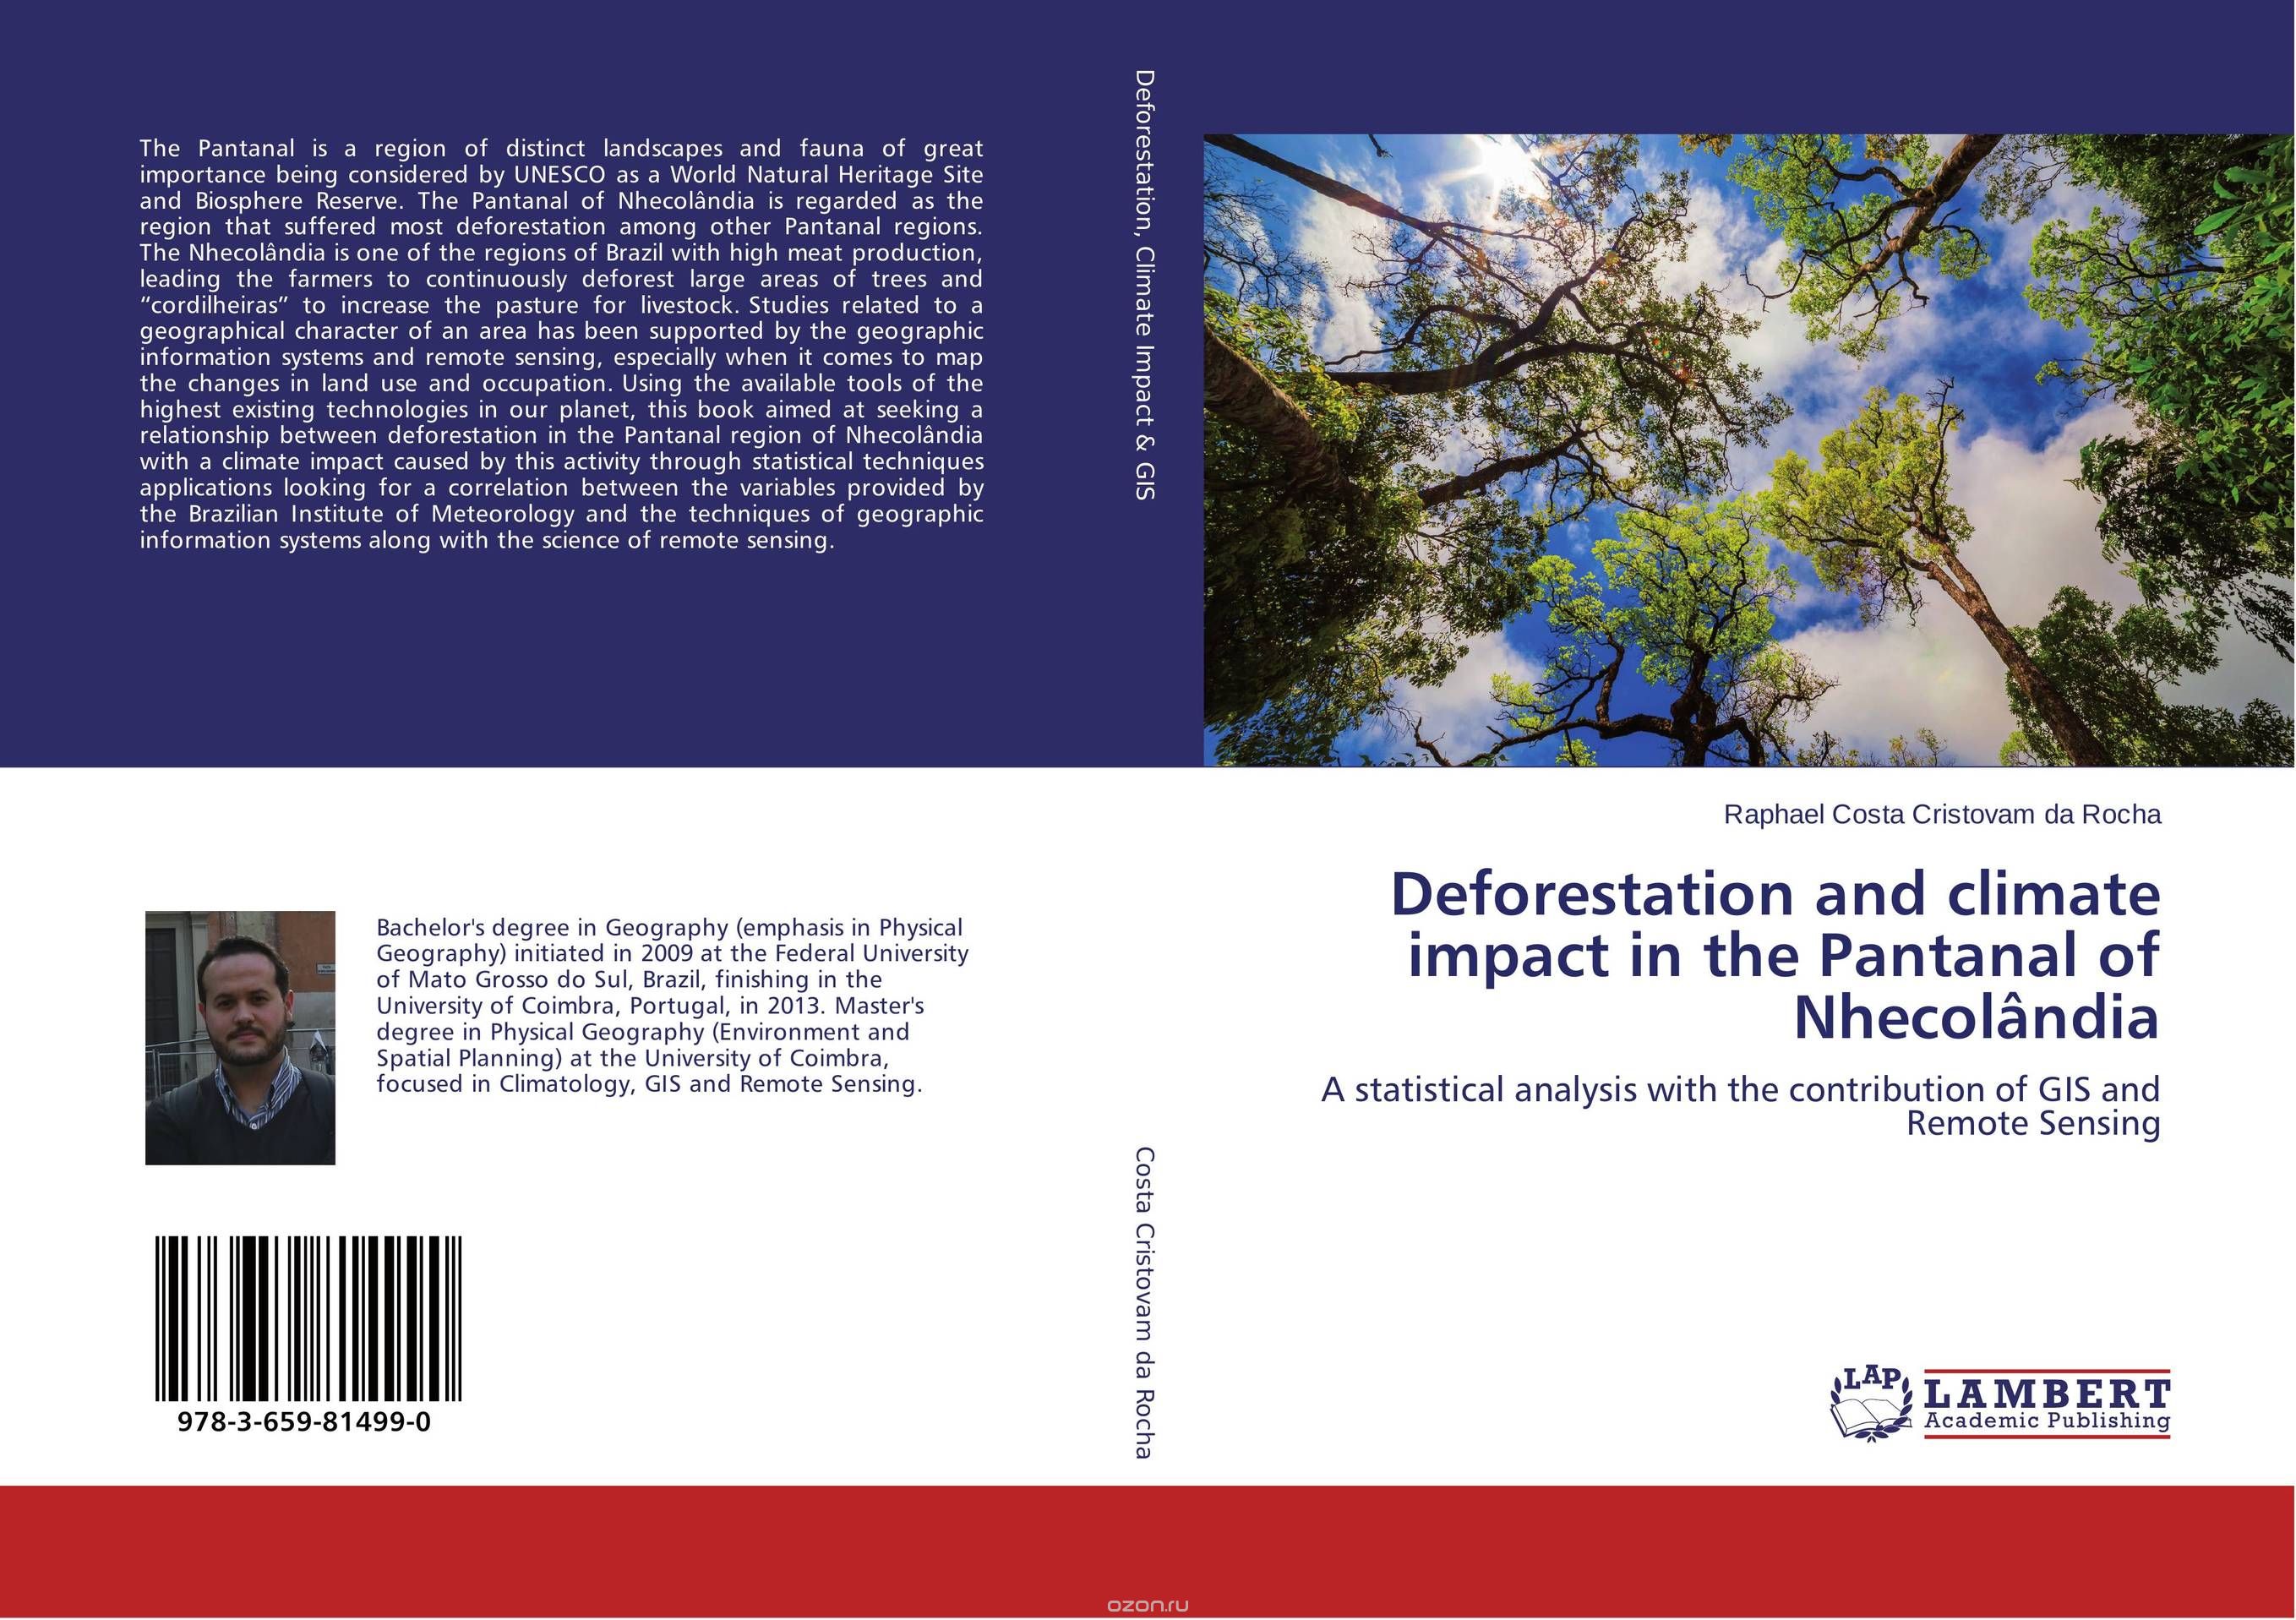 Deforestation and climate impact in the Pantanal of Nhecolandia